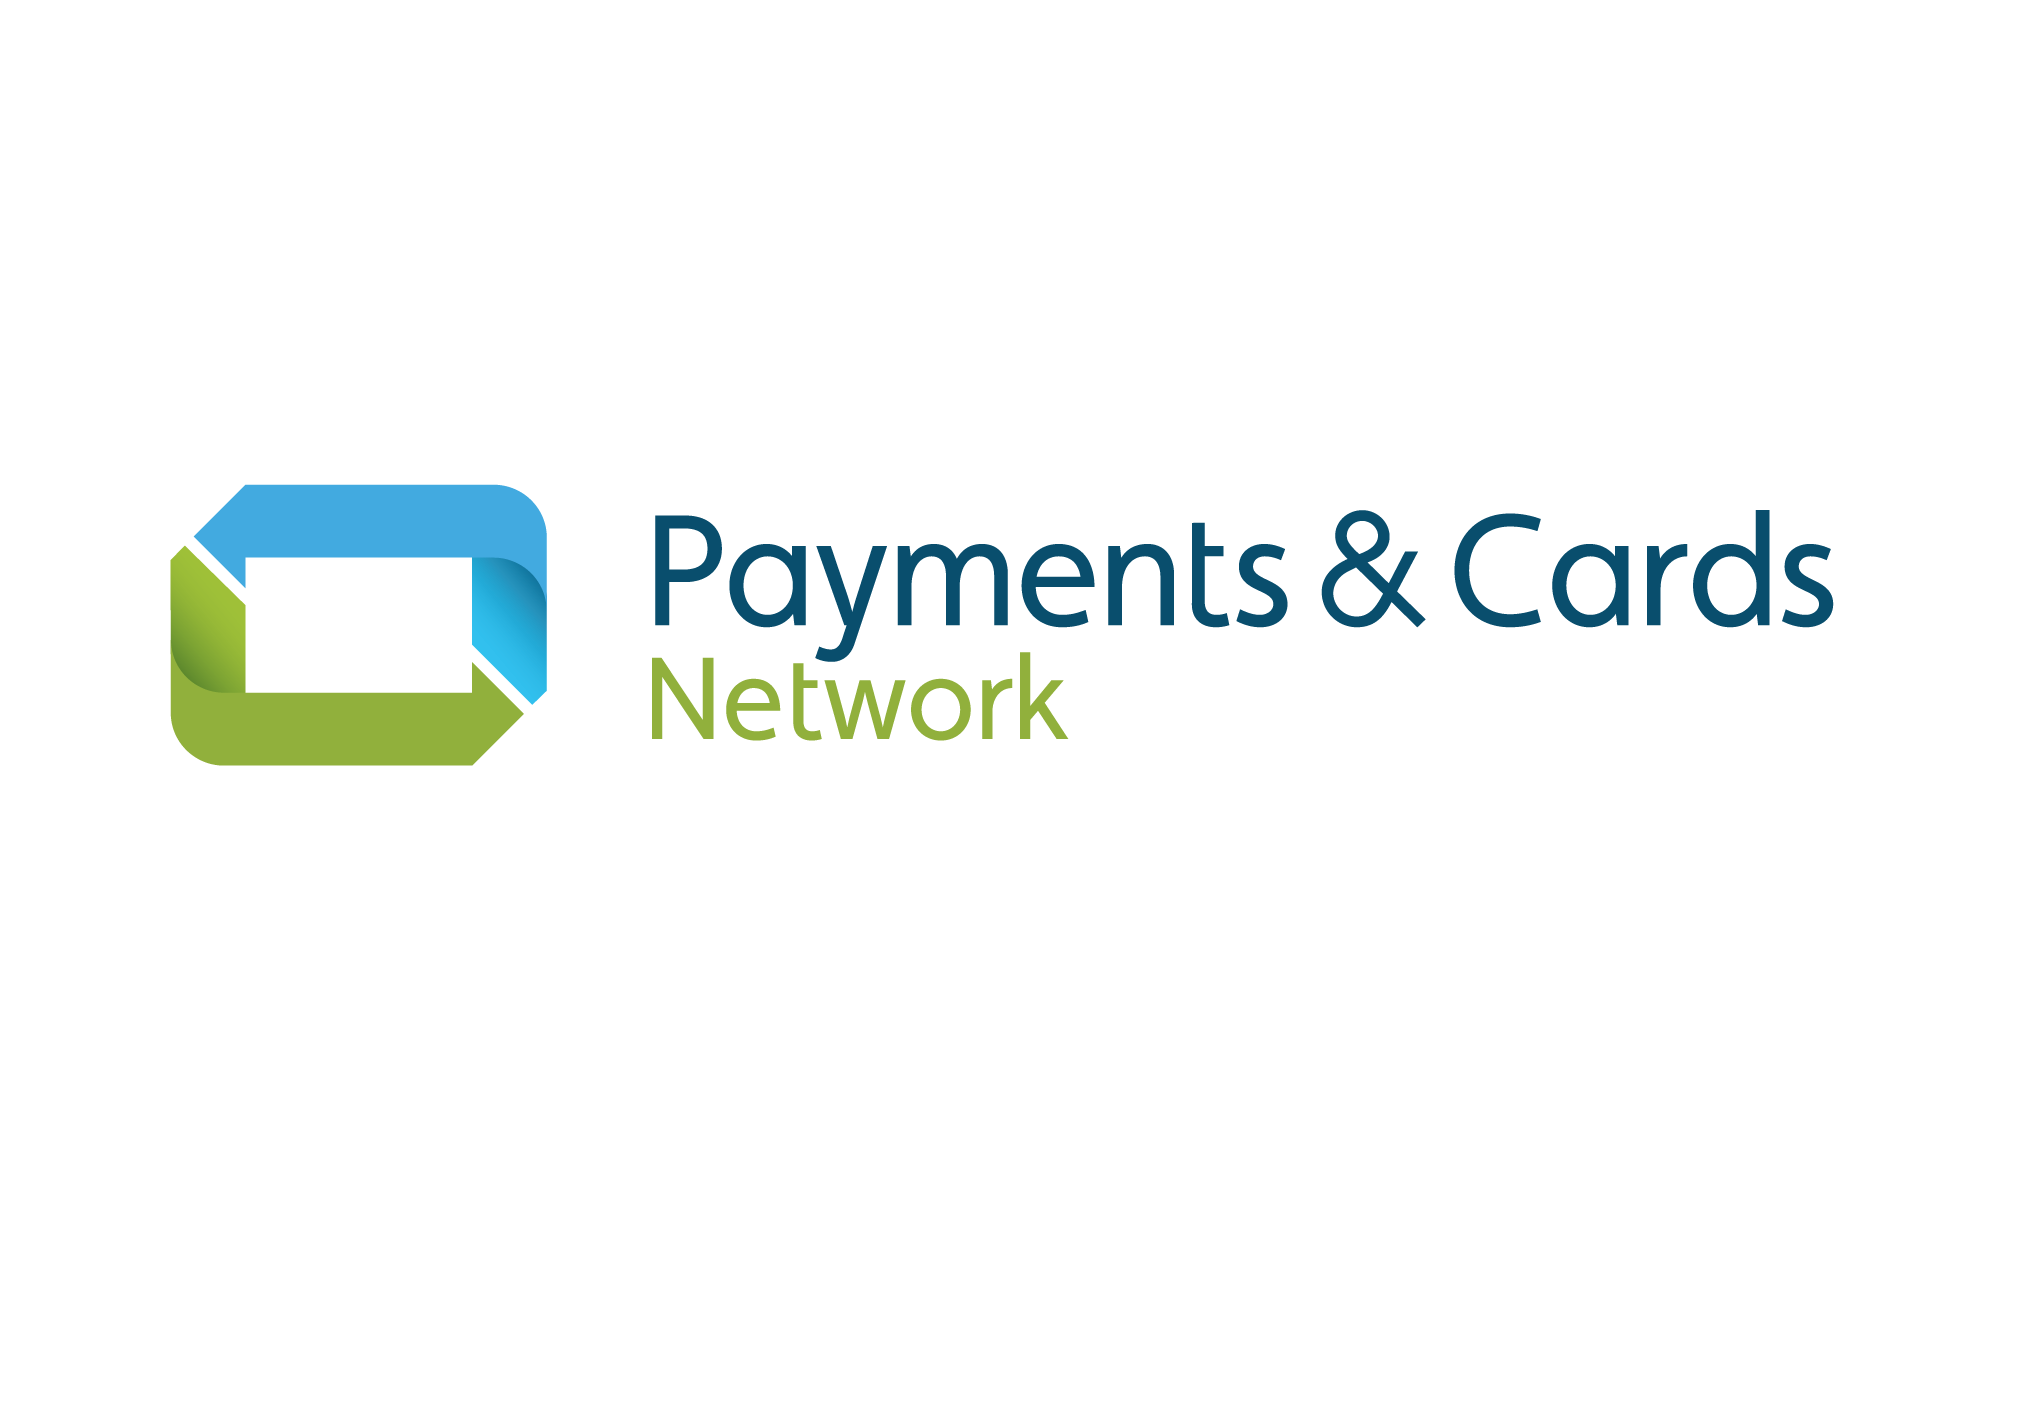 The Payments & Cards Network